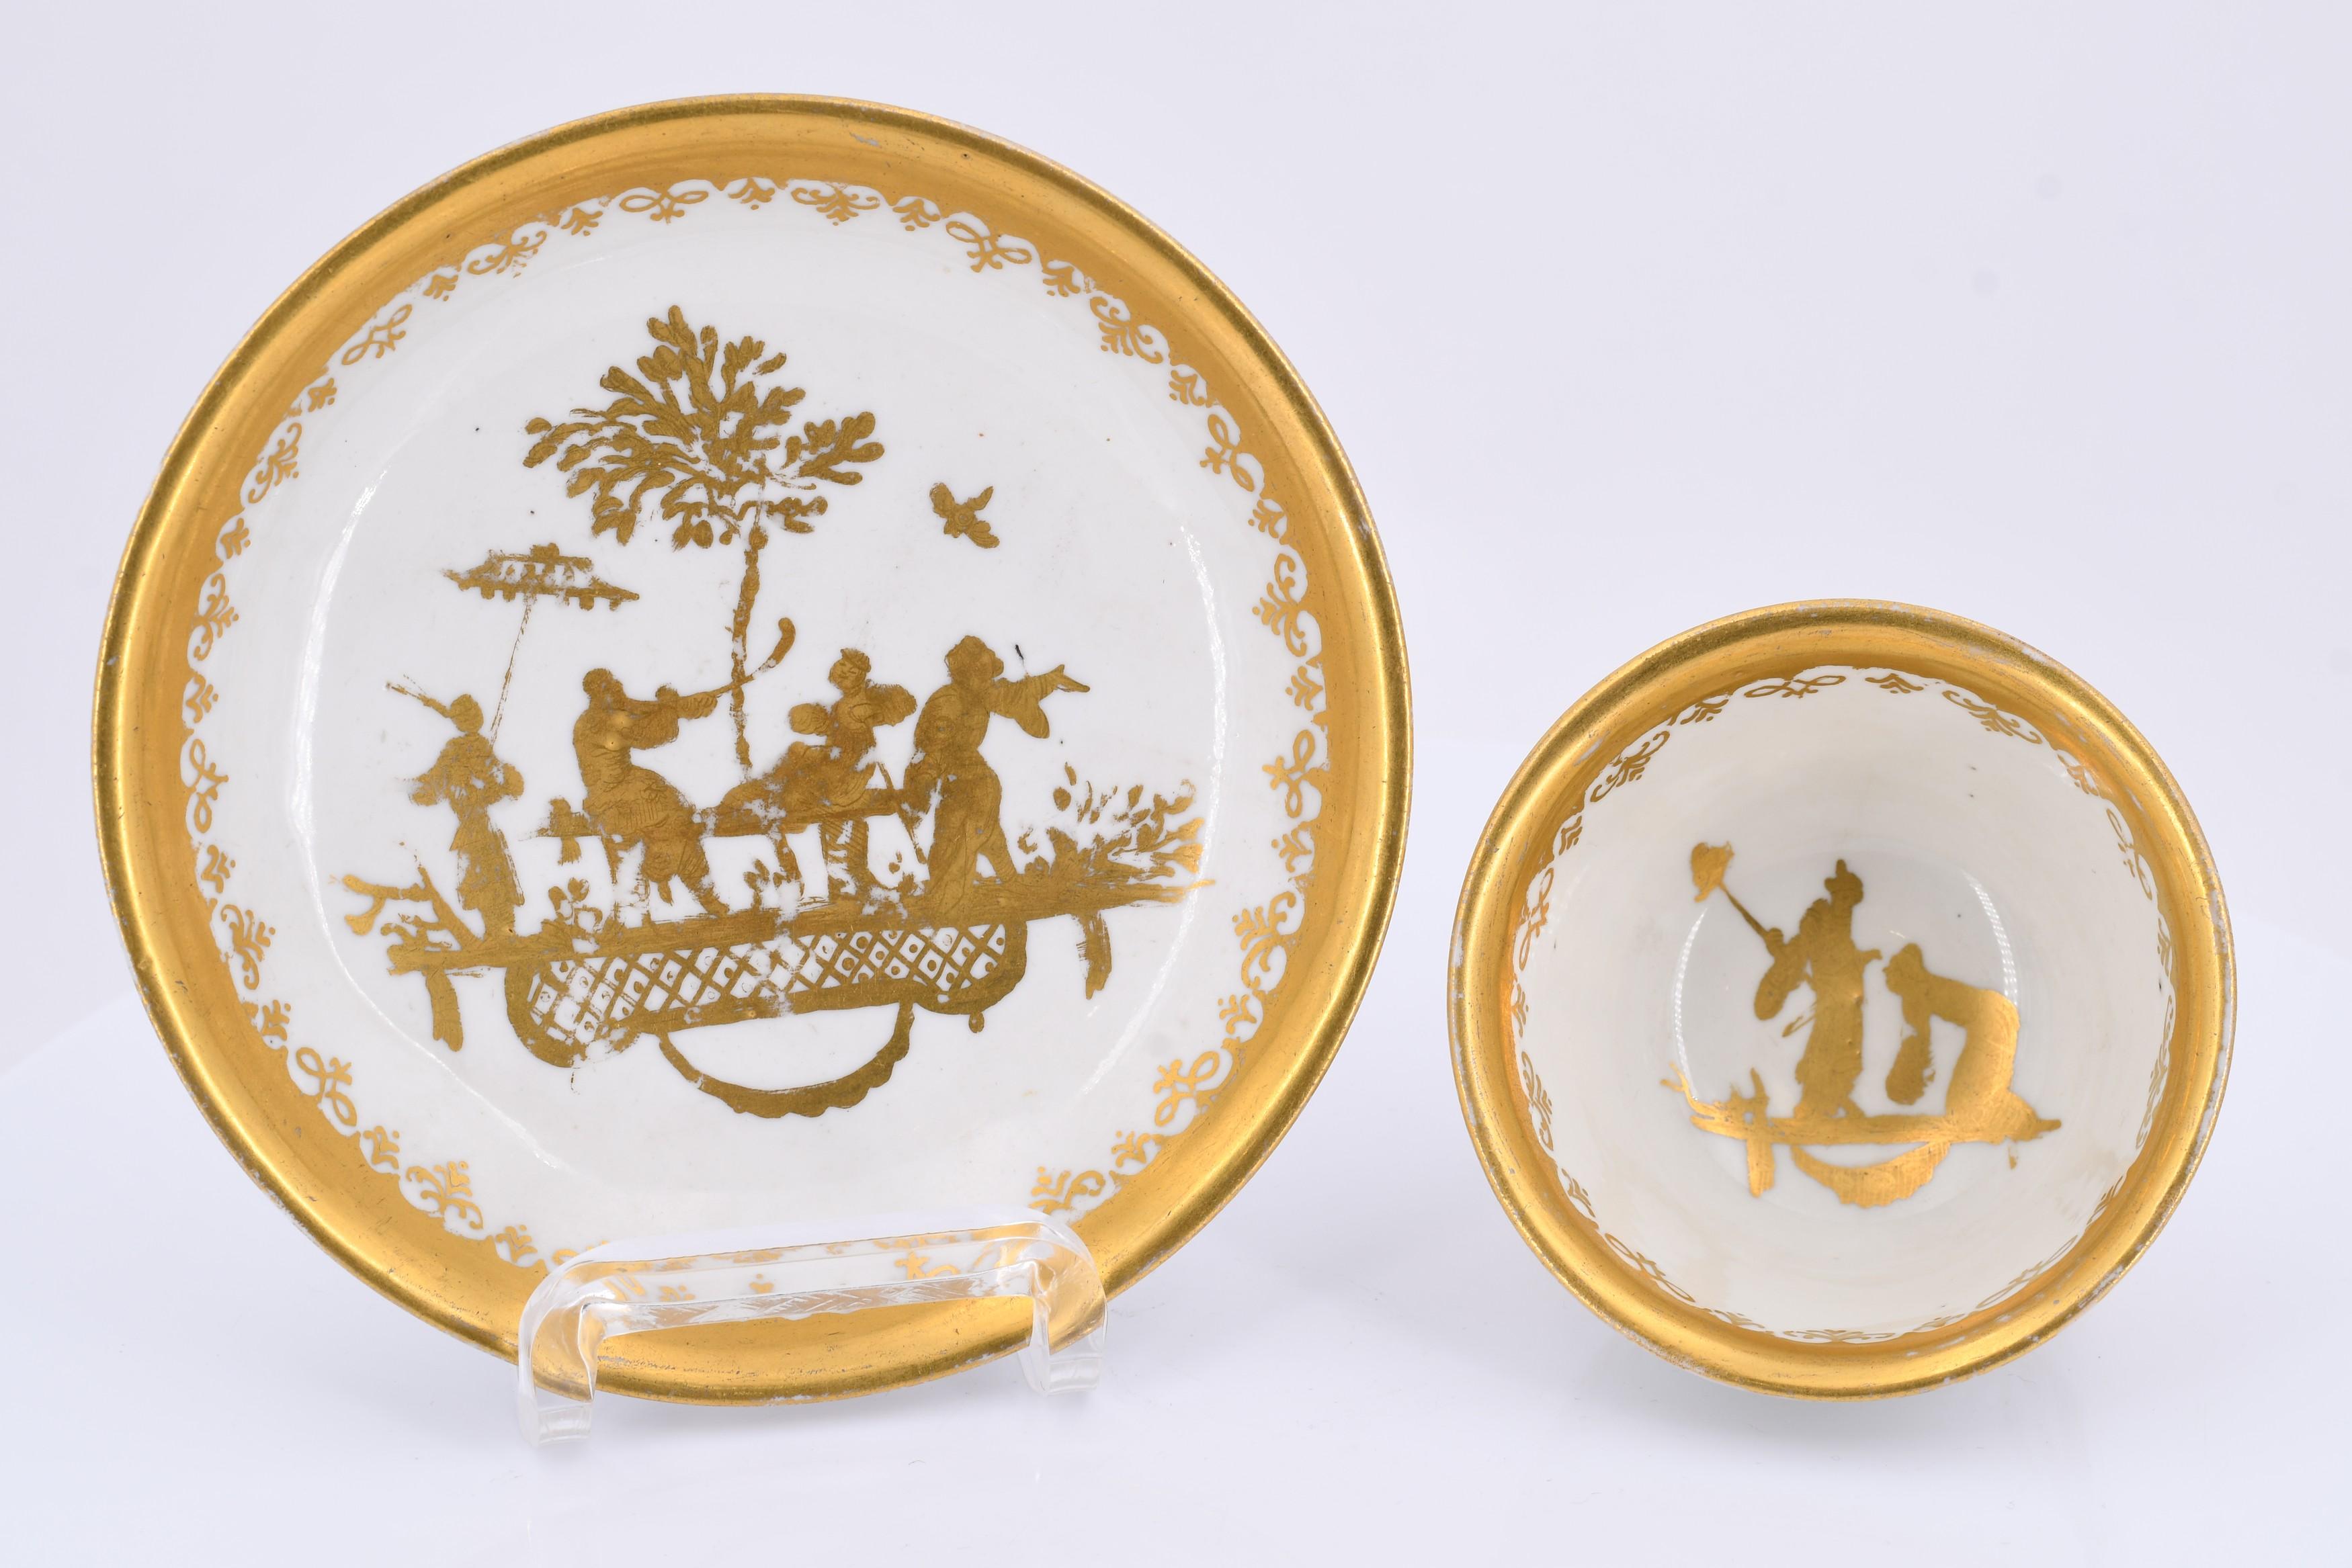 Tea bowl and saucer with gold Chinese décor - Image 6 of 7